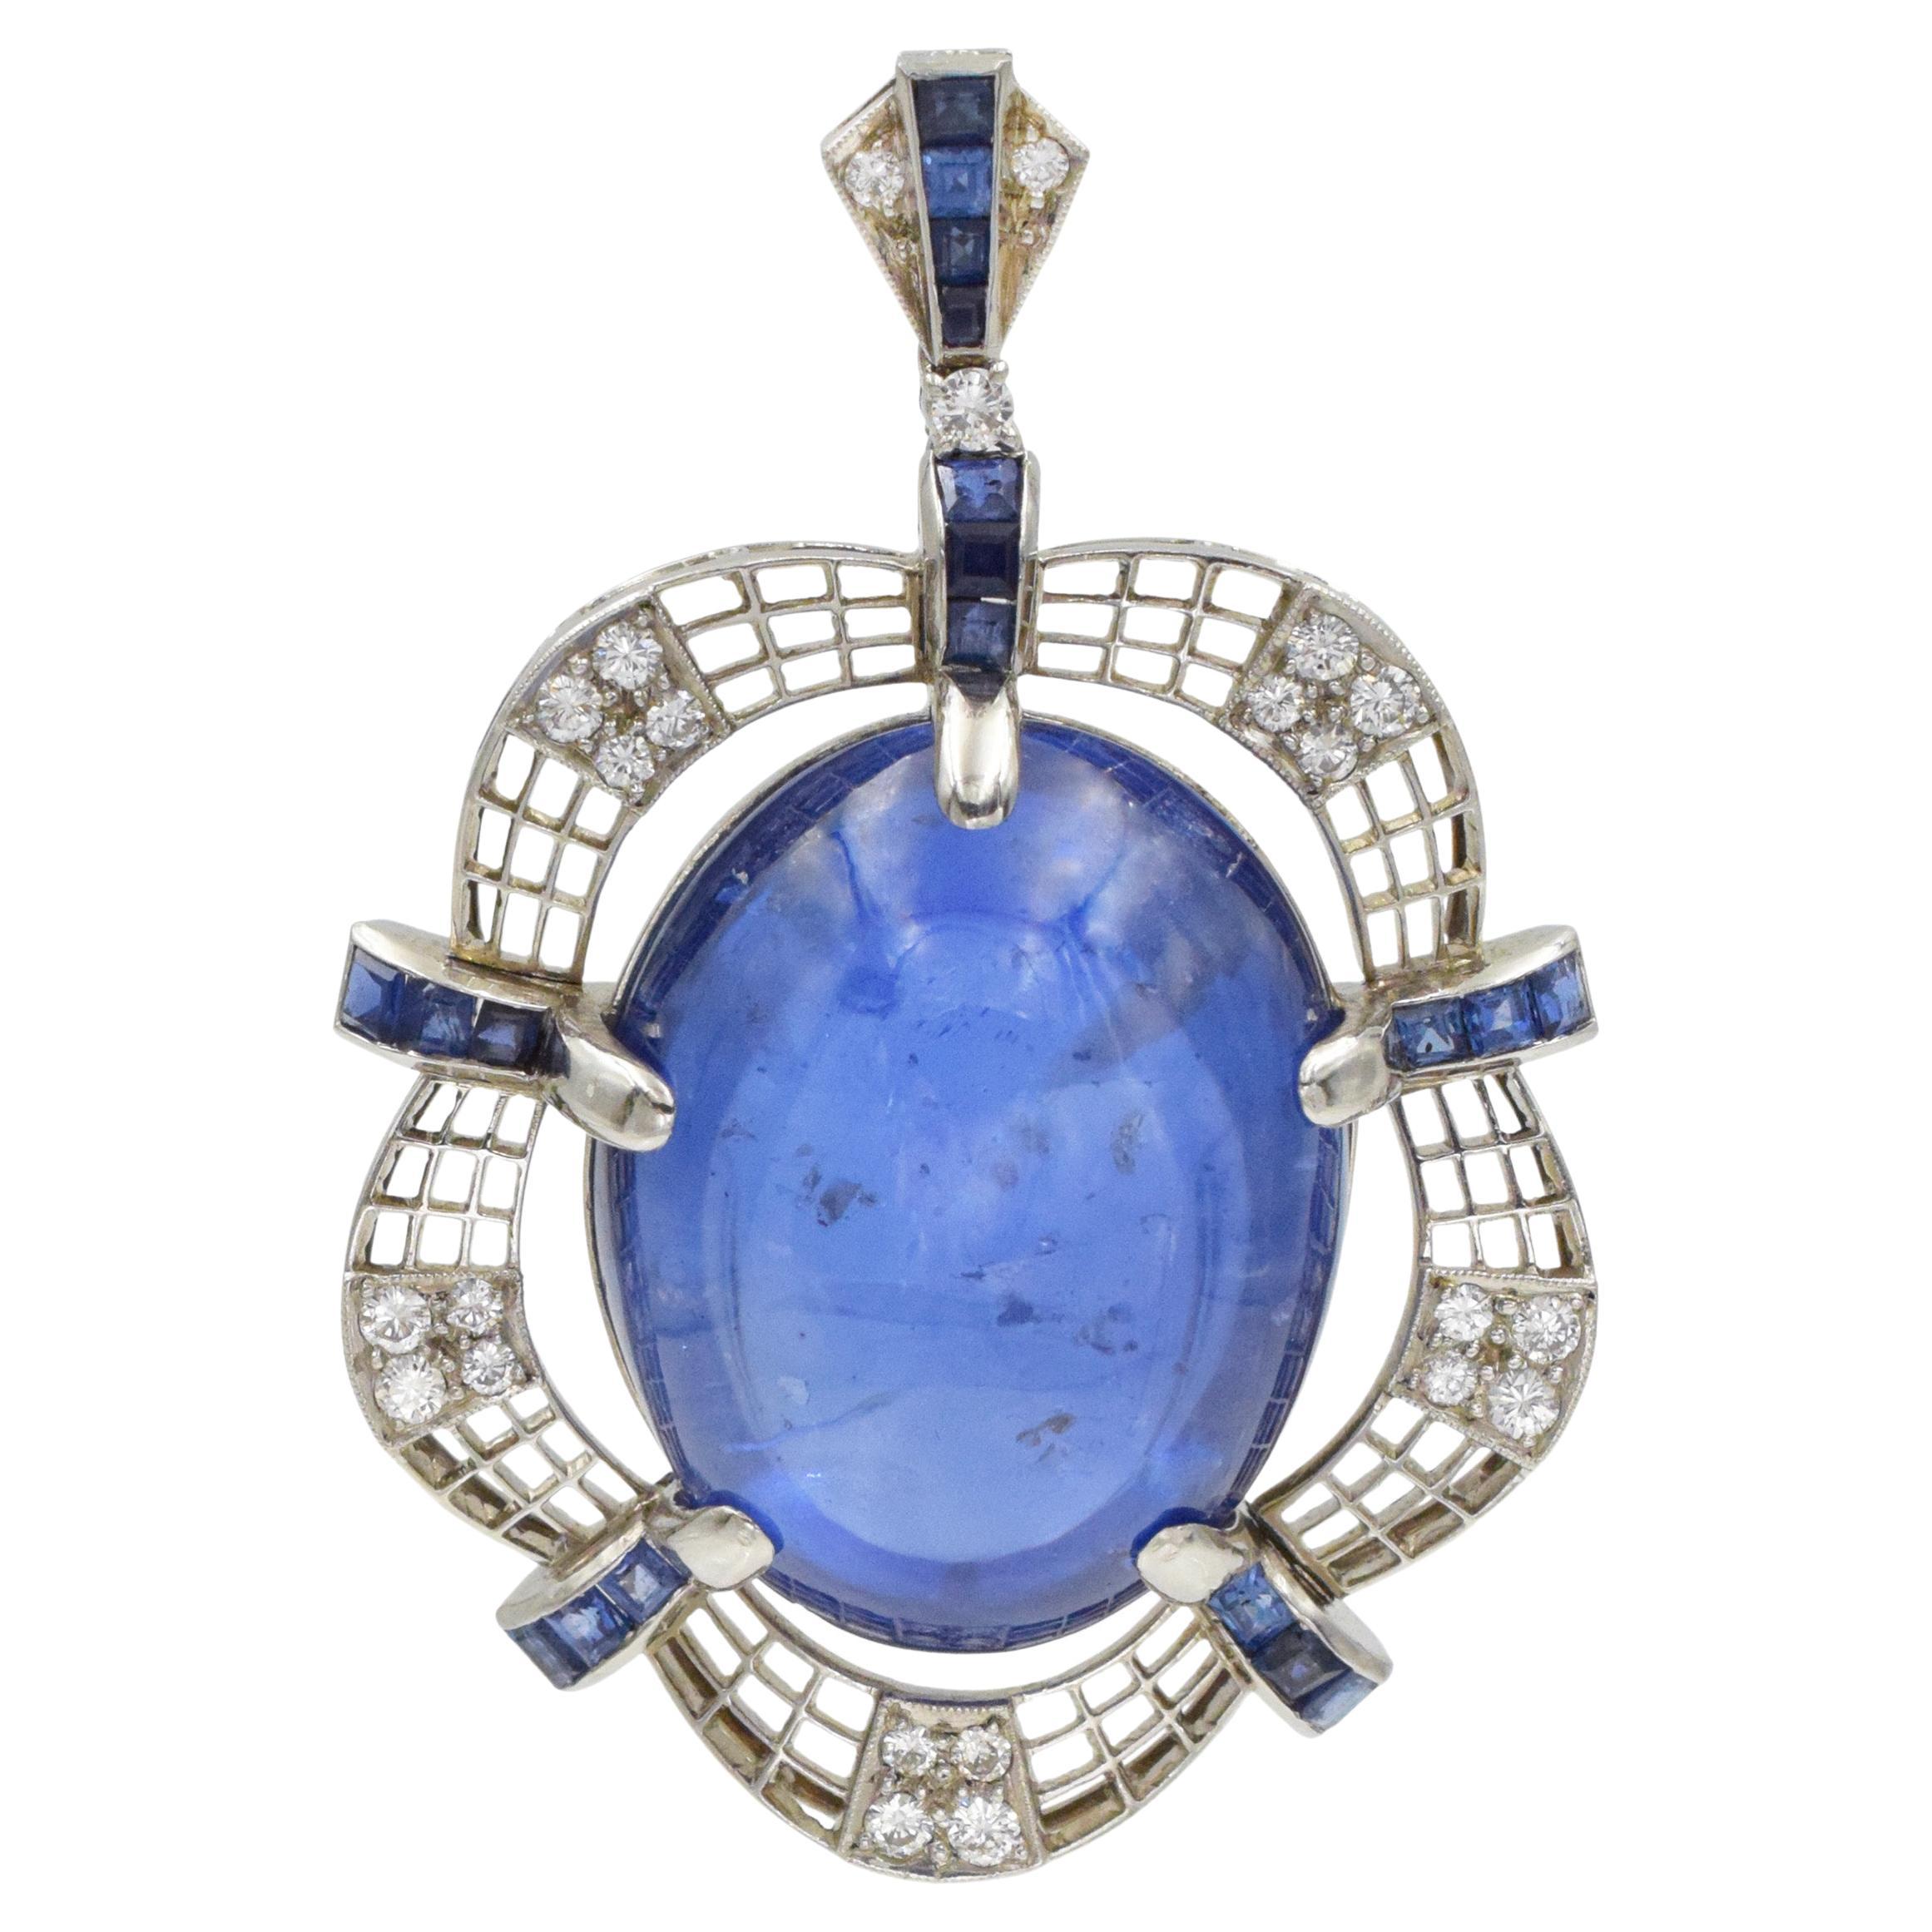 Impressive Sapphire pendant!
Center of this pendant is set with oval double cabochon-cut sapphire with weight of 92.04ct, accented with 19 square shaped sapphires with total weight of approximately 1.50ct, and 23 round brilliant cut diamonds, with